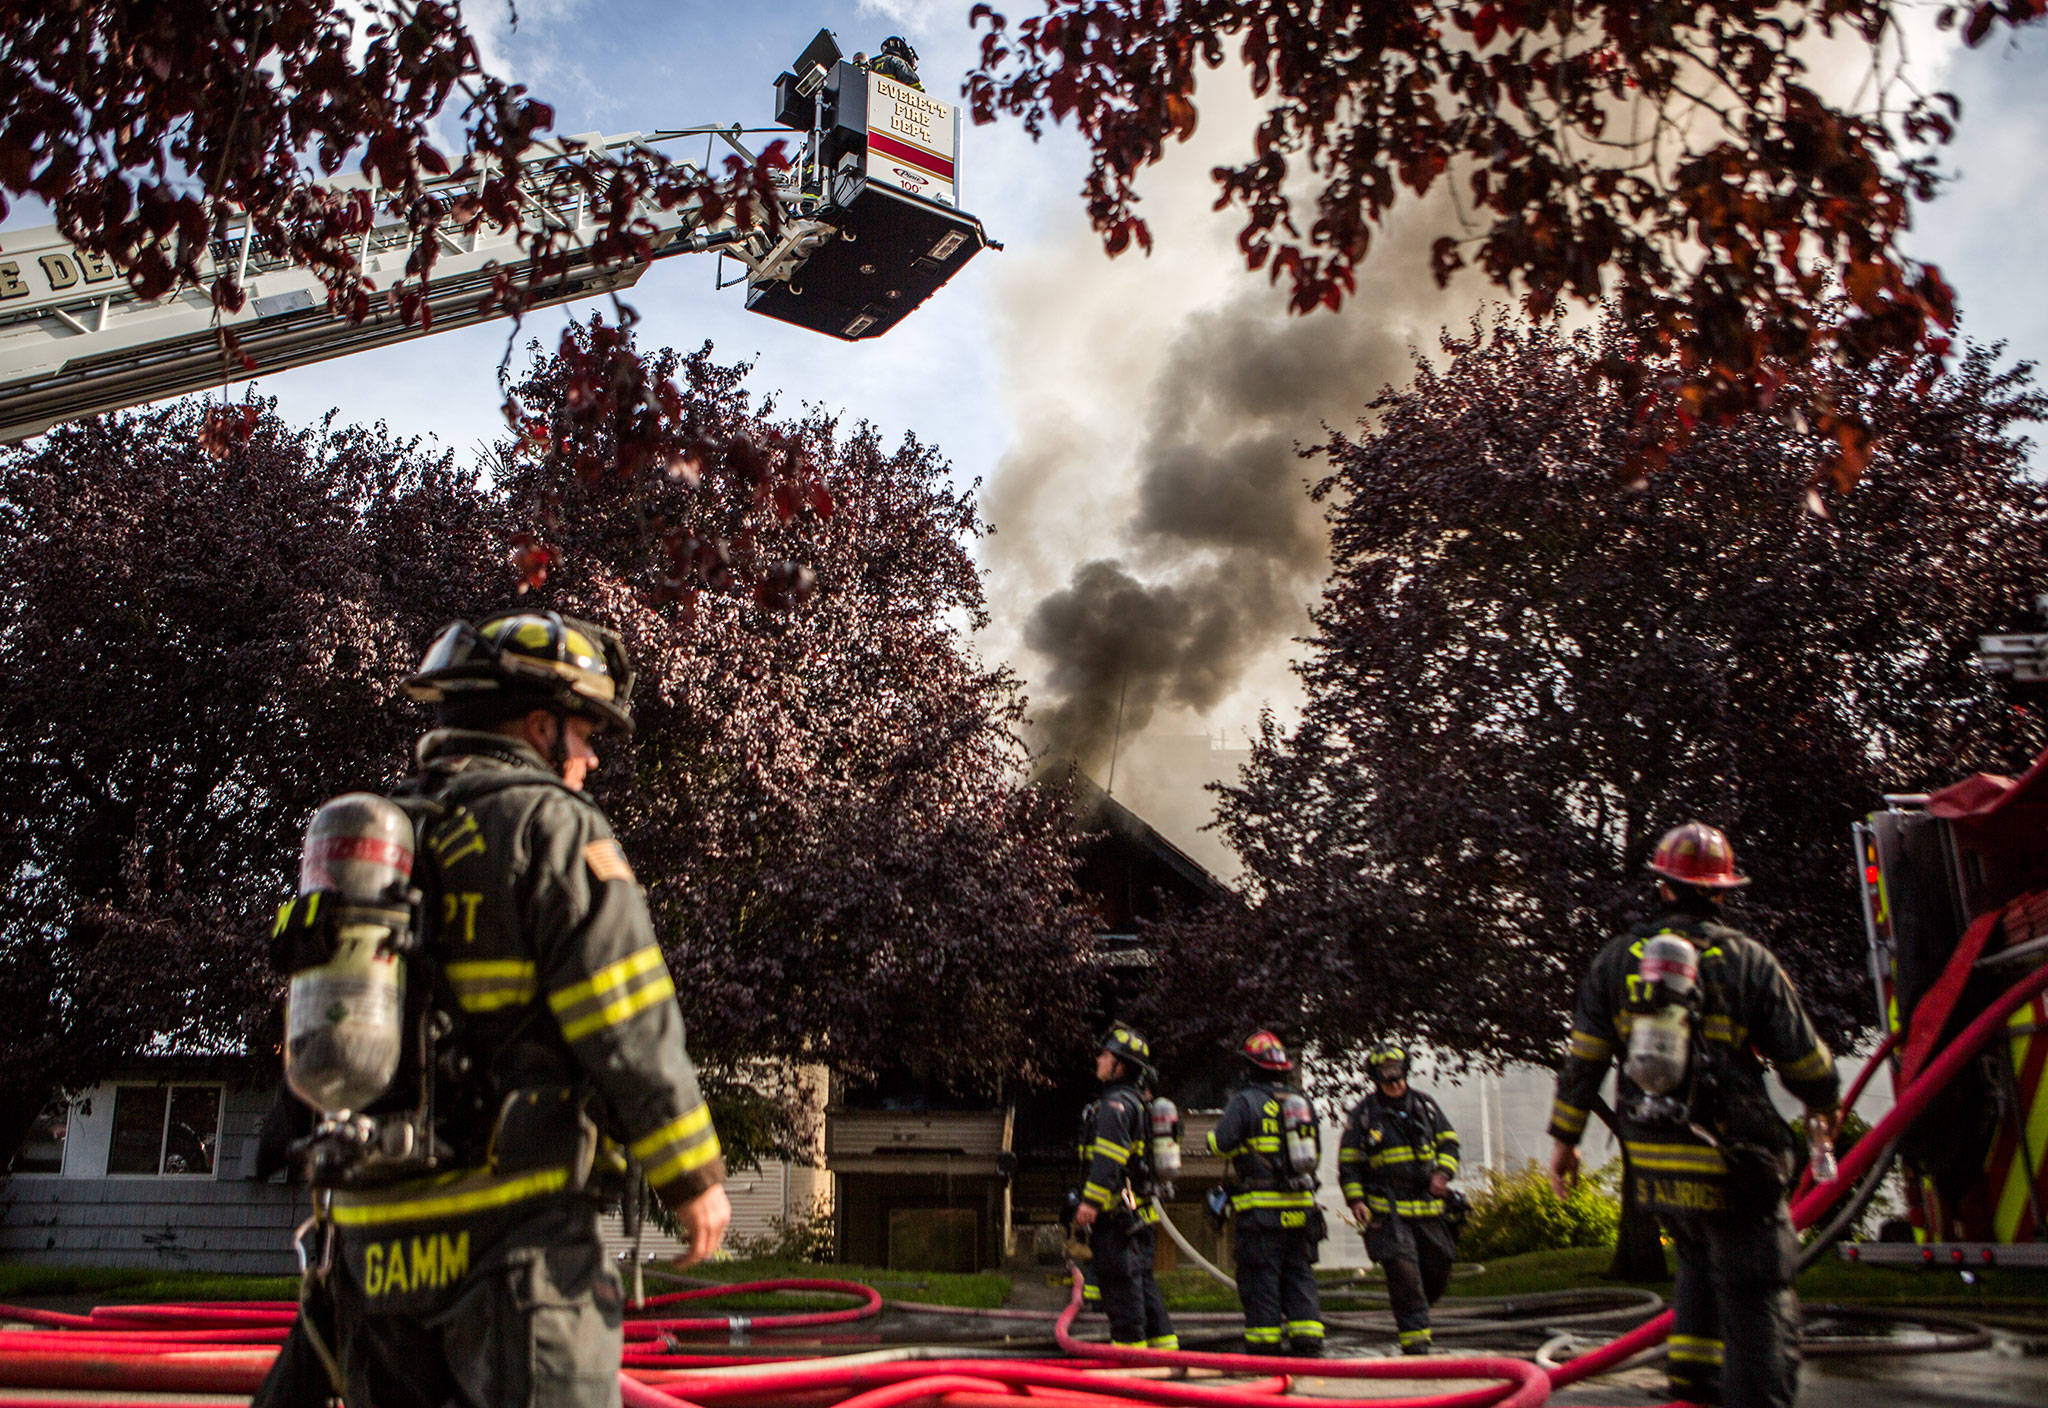 Everett firefighters battle a house fire near Lombard Ave and 32nd Street on Thursday. (Olivia Vanni / The Herald)